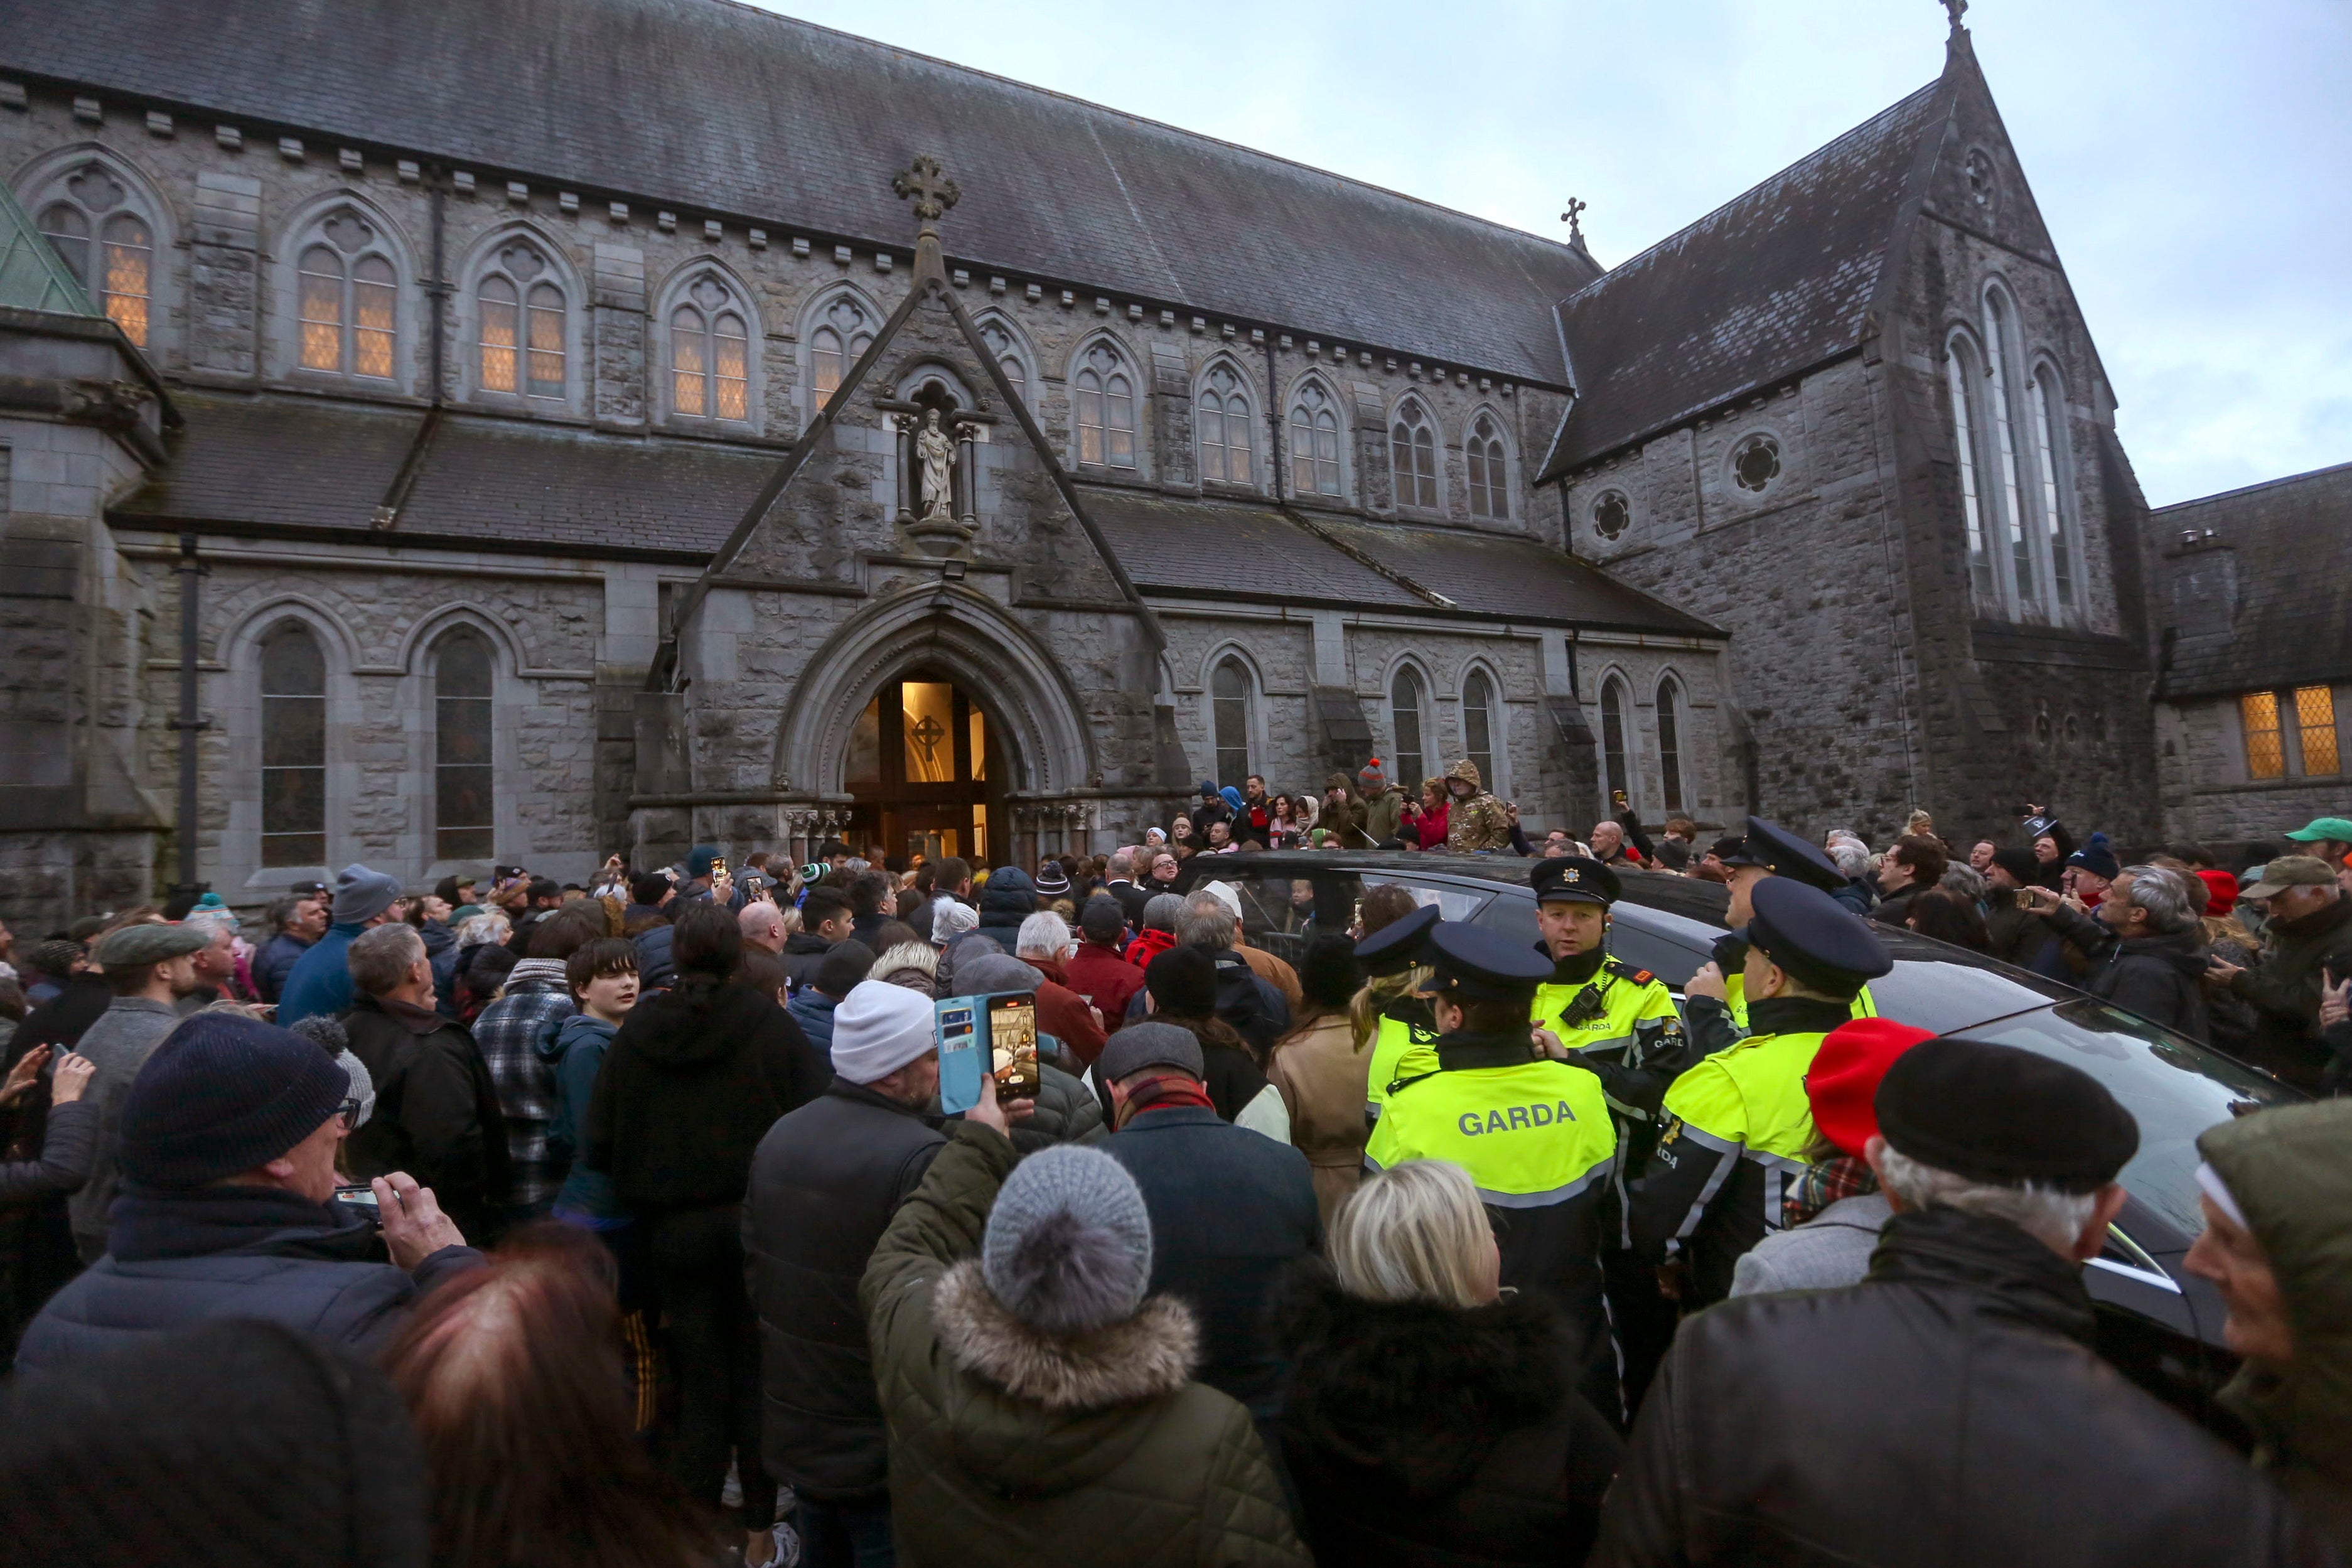 Huge crowds gathered at the church in Nenagh